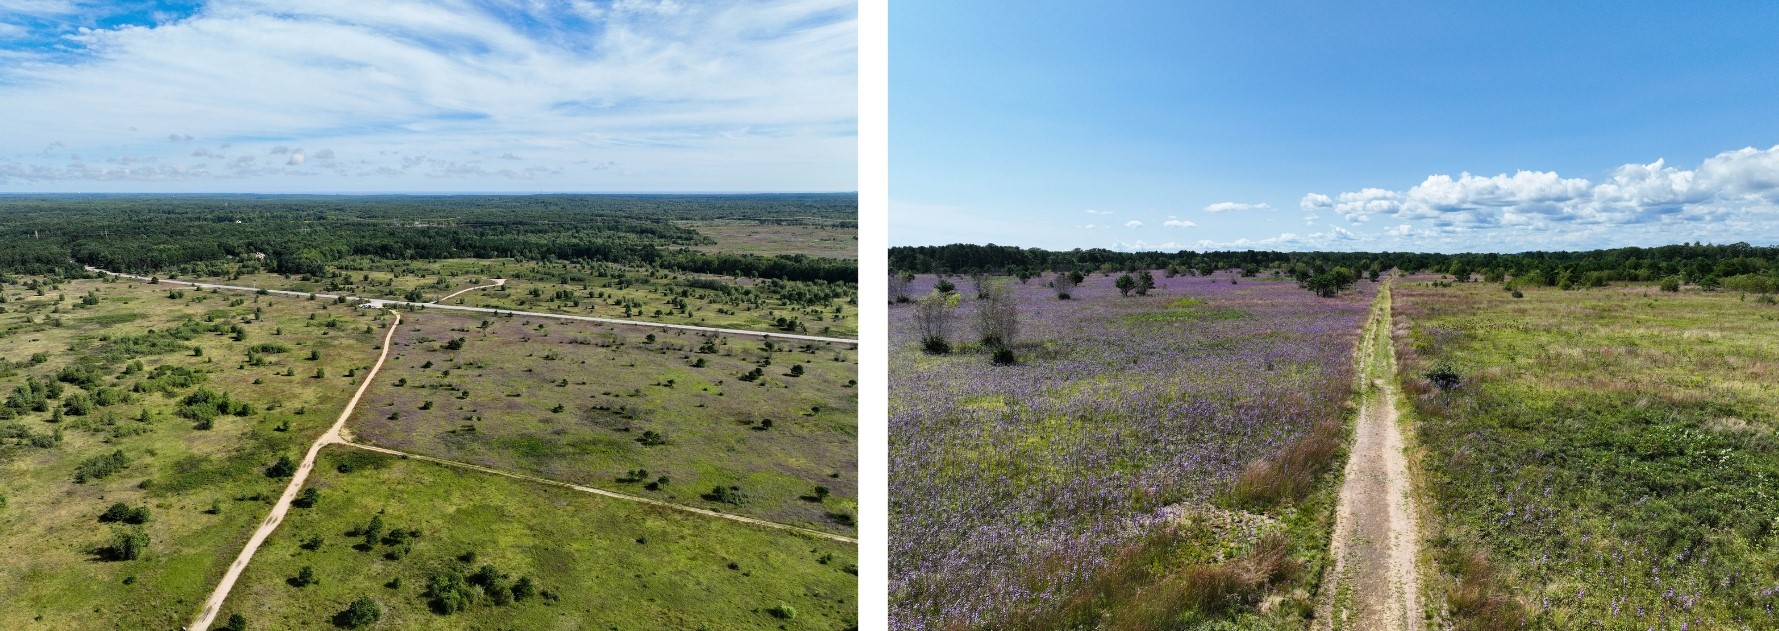 Aerial views of Kennebunk Plains Wildlife Management Area showing the distinct unit of of purple blooms following a burn.